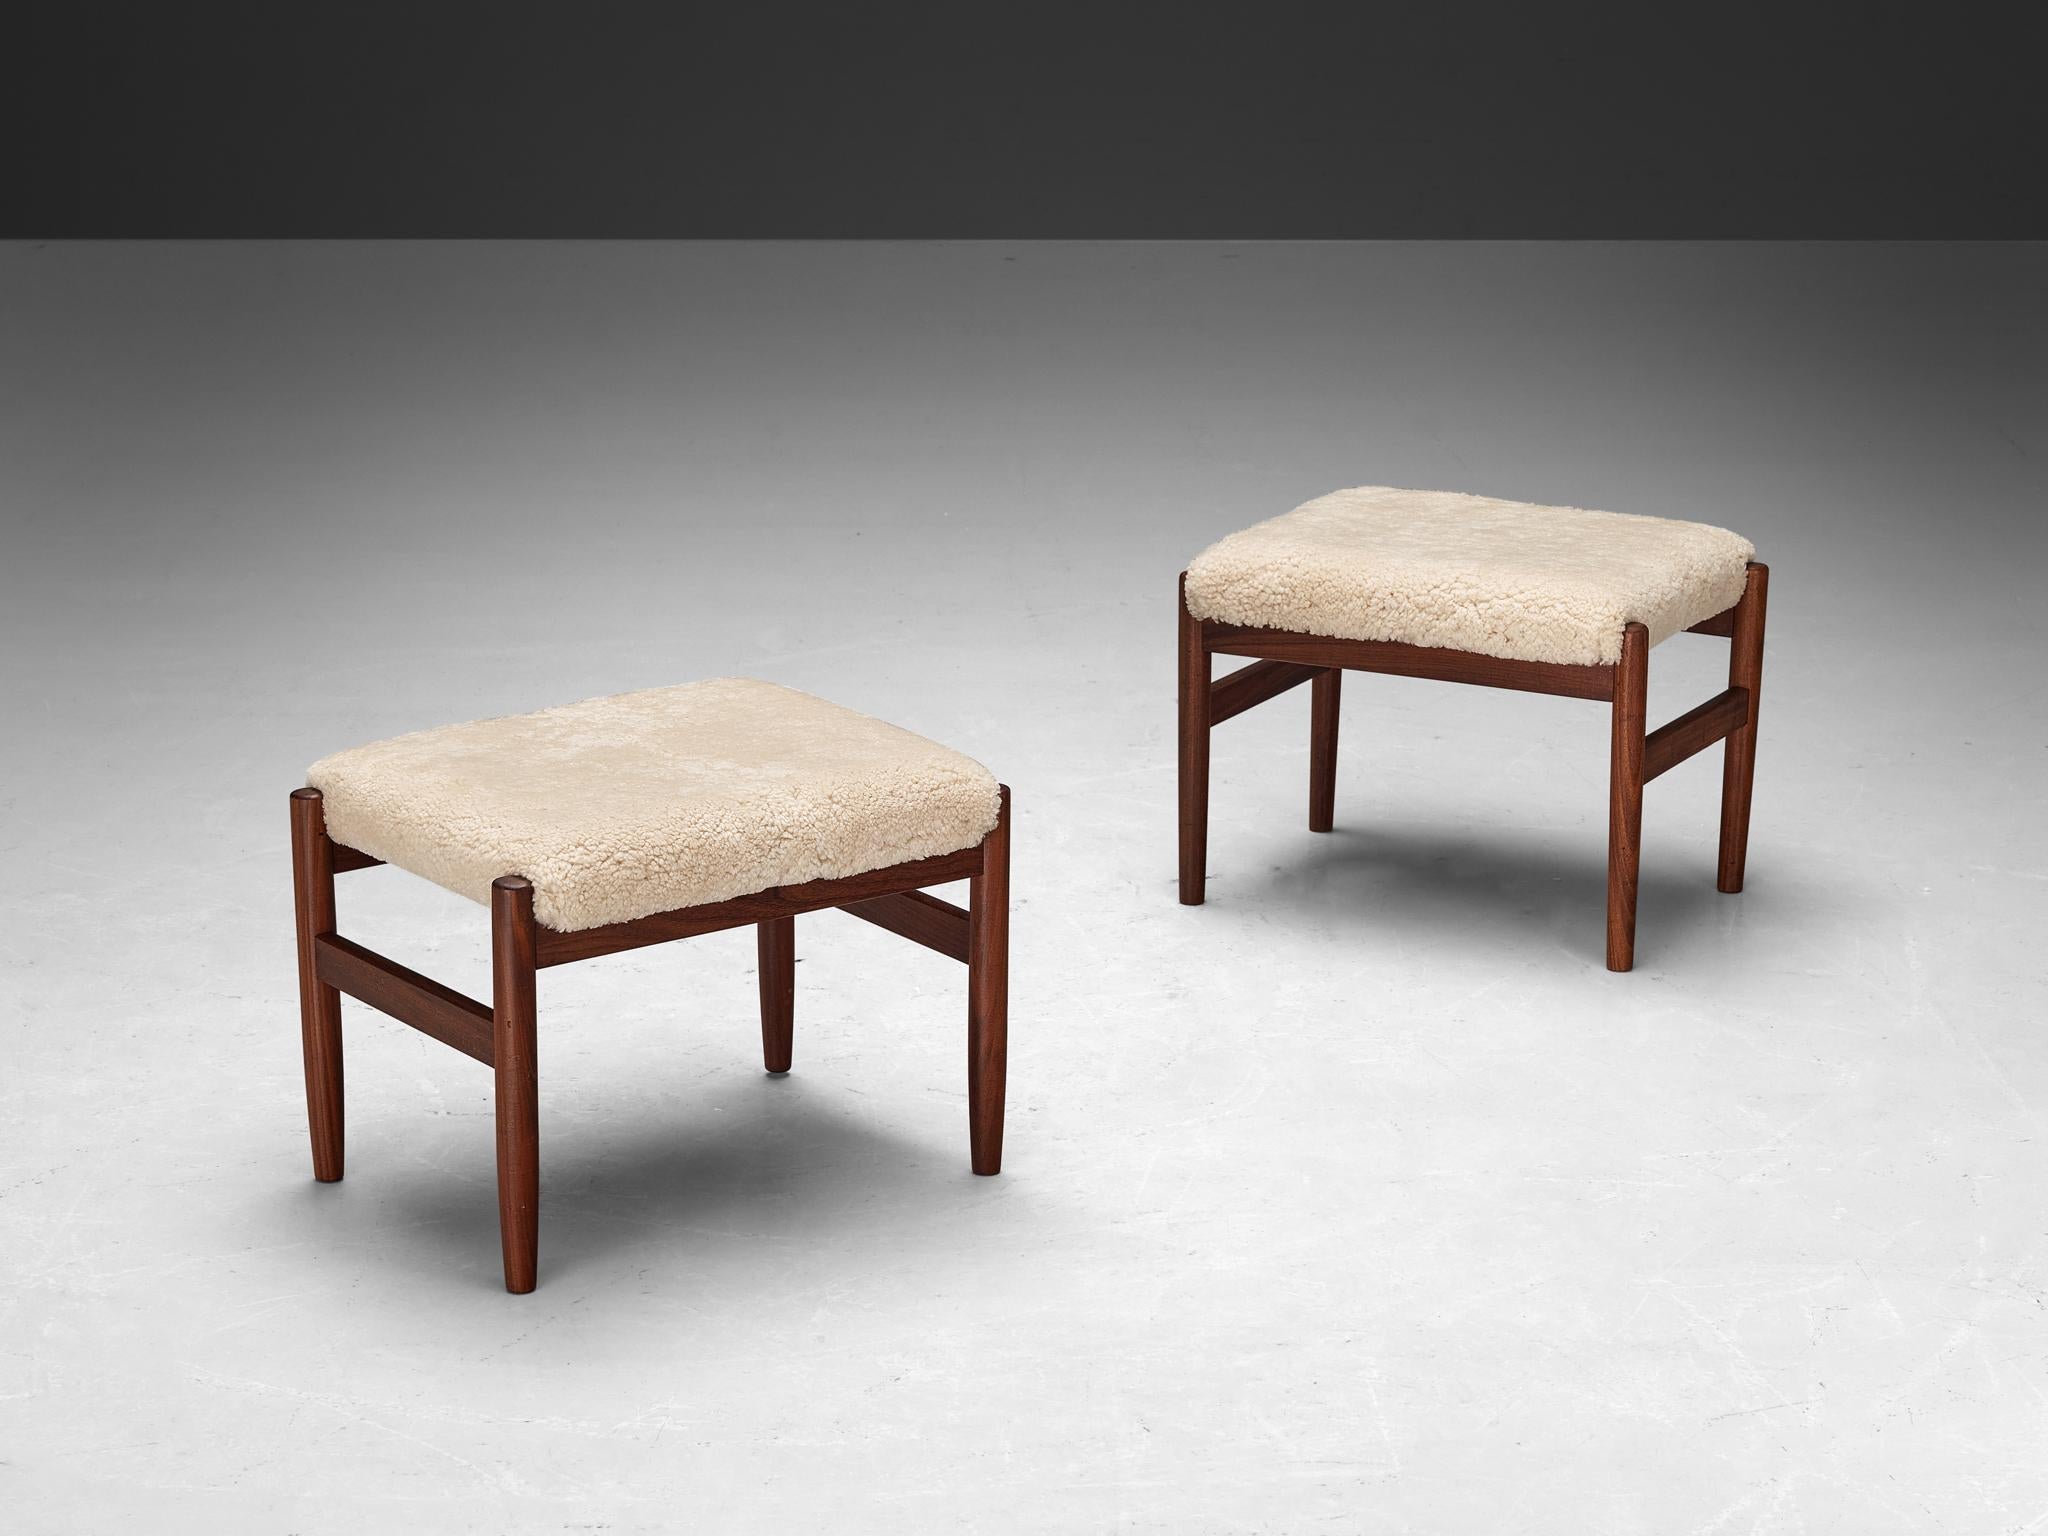 Scandinavian Stools in Teak and Shearling Upholstery